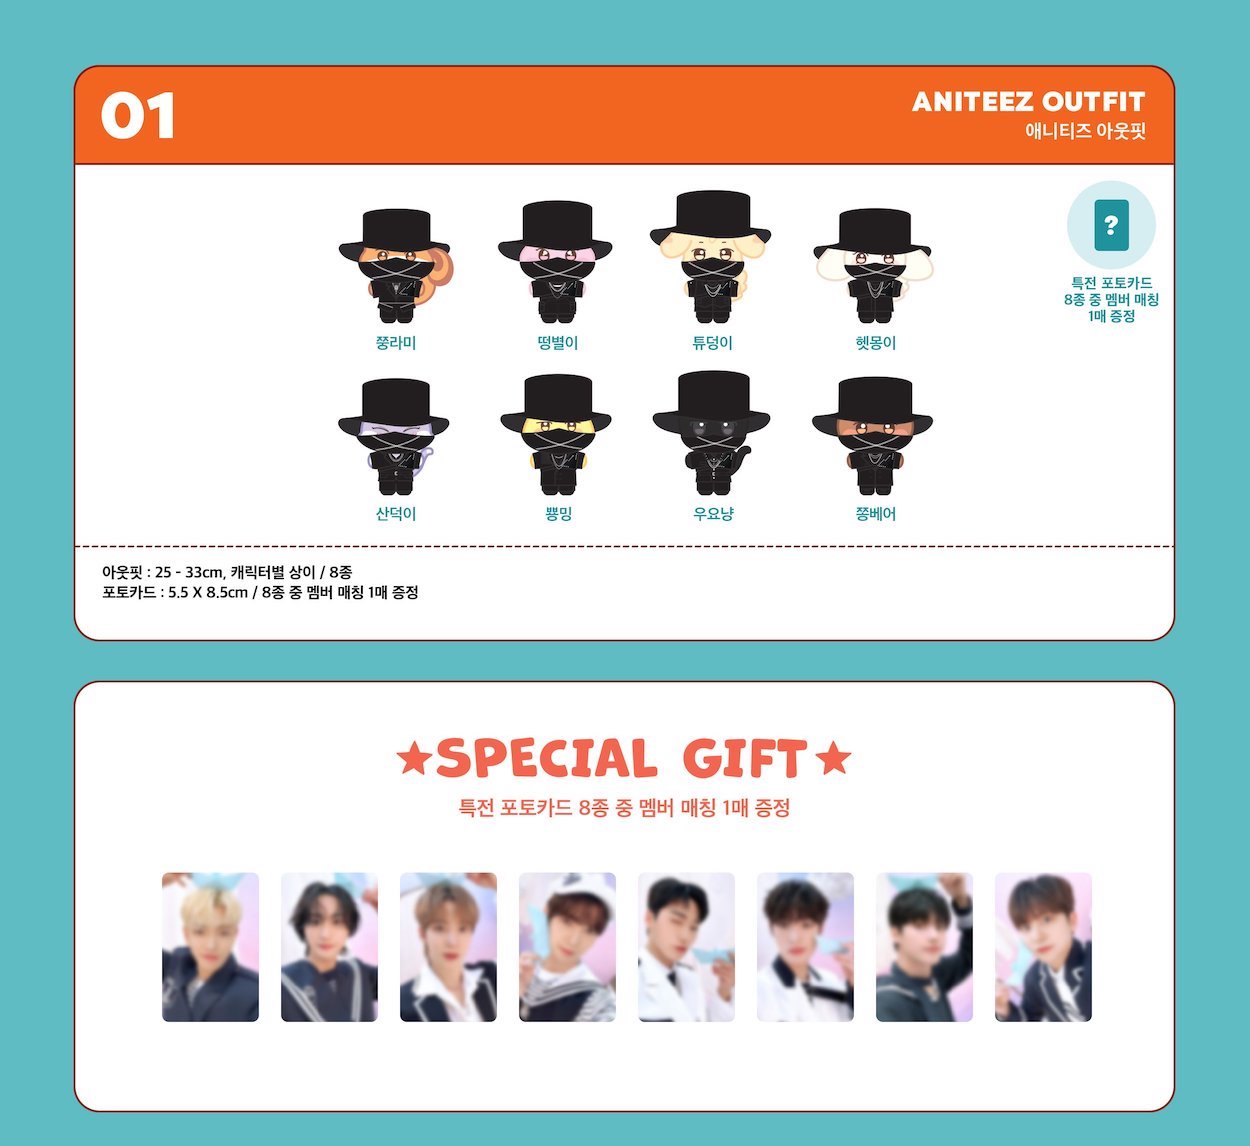 ATEEZ [ANITEEZ IN ILLUSION] OFFICIAL MERCH - ANITEEZ OUTFIT j-store.online